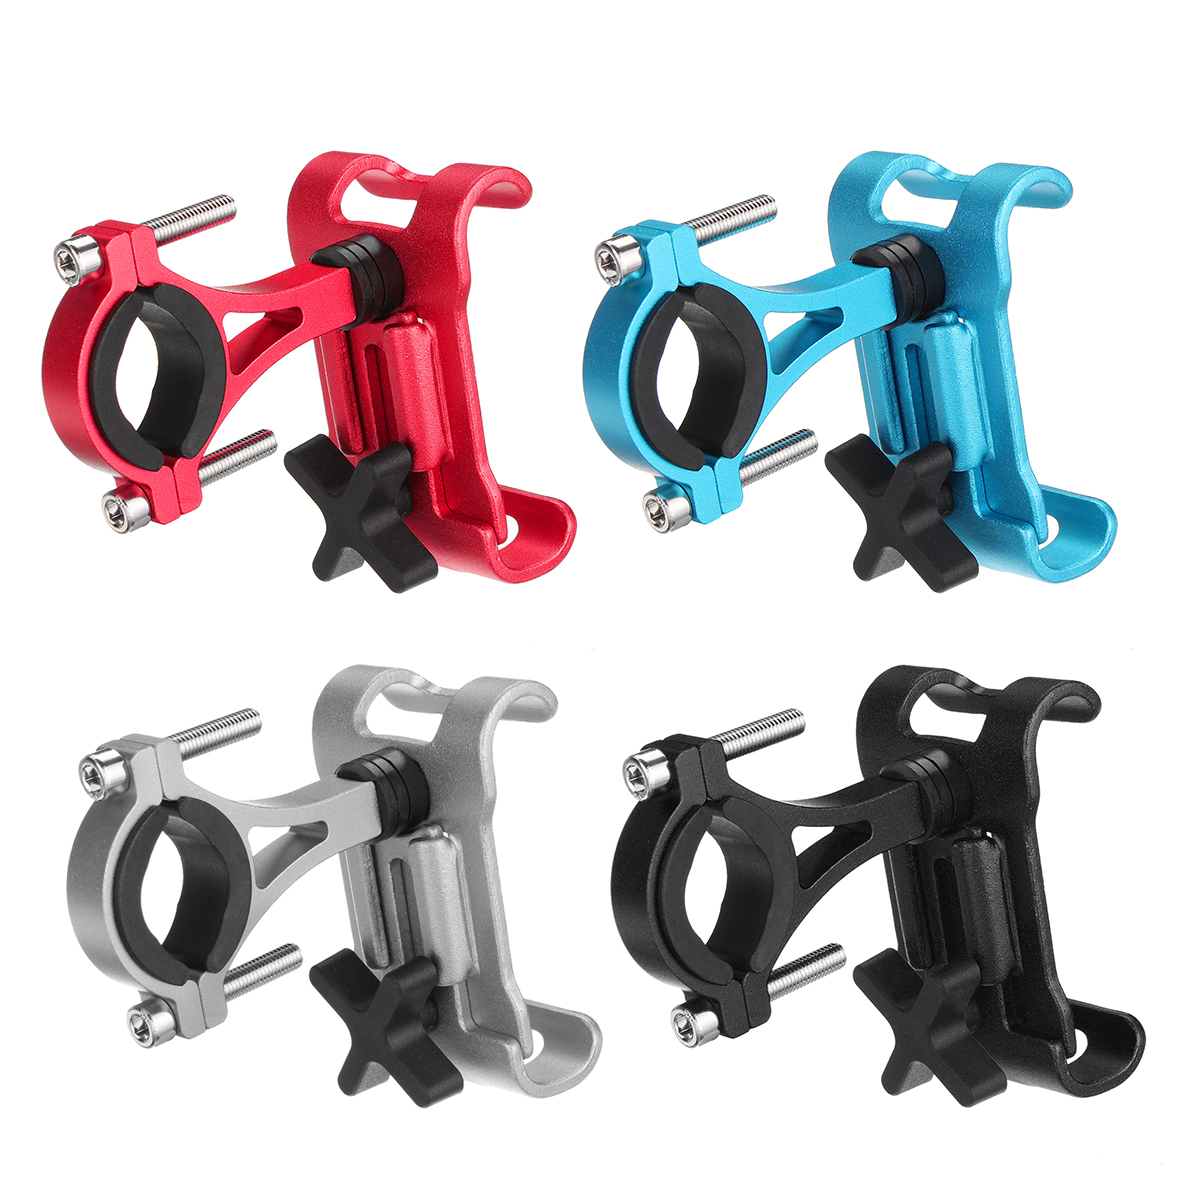 

BIKIGHT Full Aluminum Alloy Bicycle Handlebar Phone Holder Mount 360° Rotation For iPhone X SE 7/8 Plus 6/6s Plus Xiaomi Samsung Galaxy s6/s7/s8/s9 Plus Android